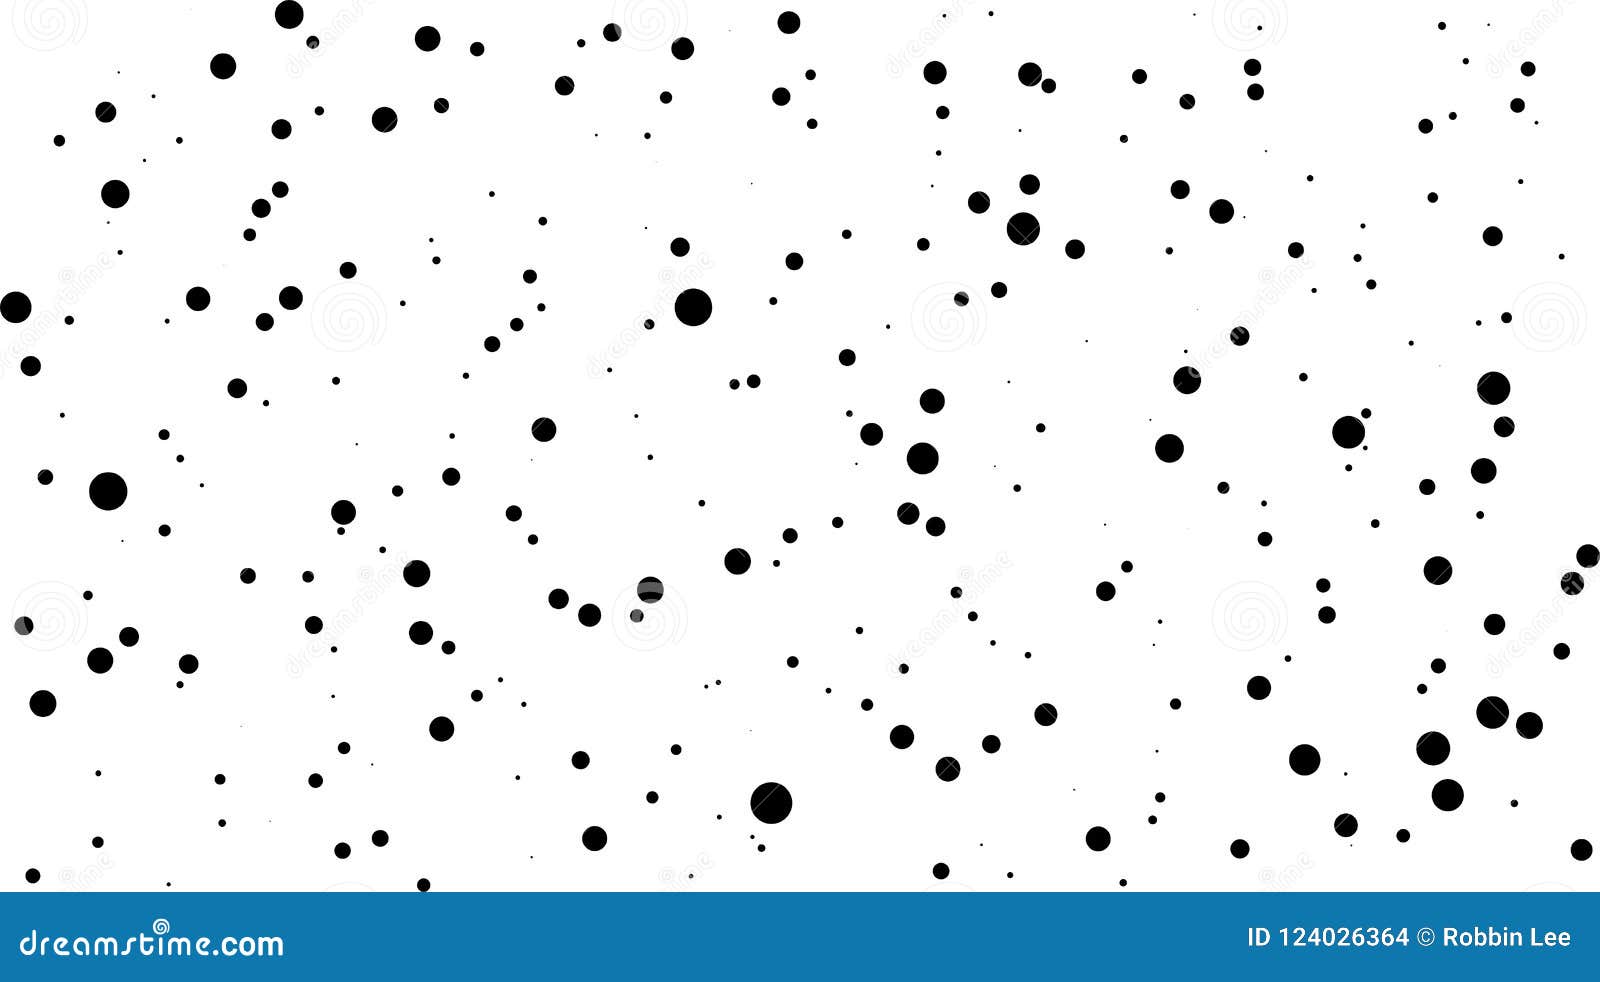 random dots pattern. abstract background.